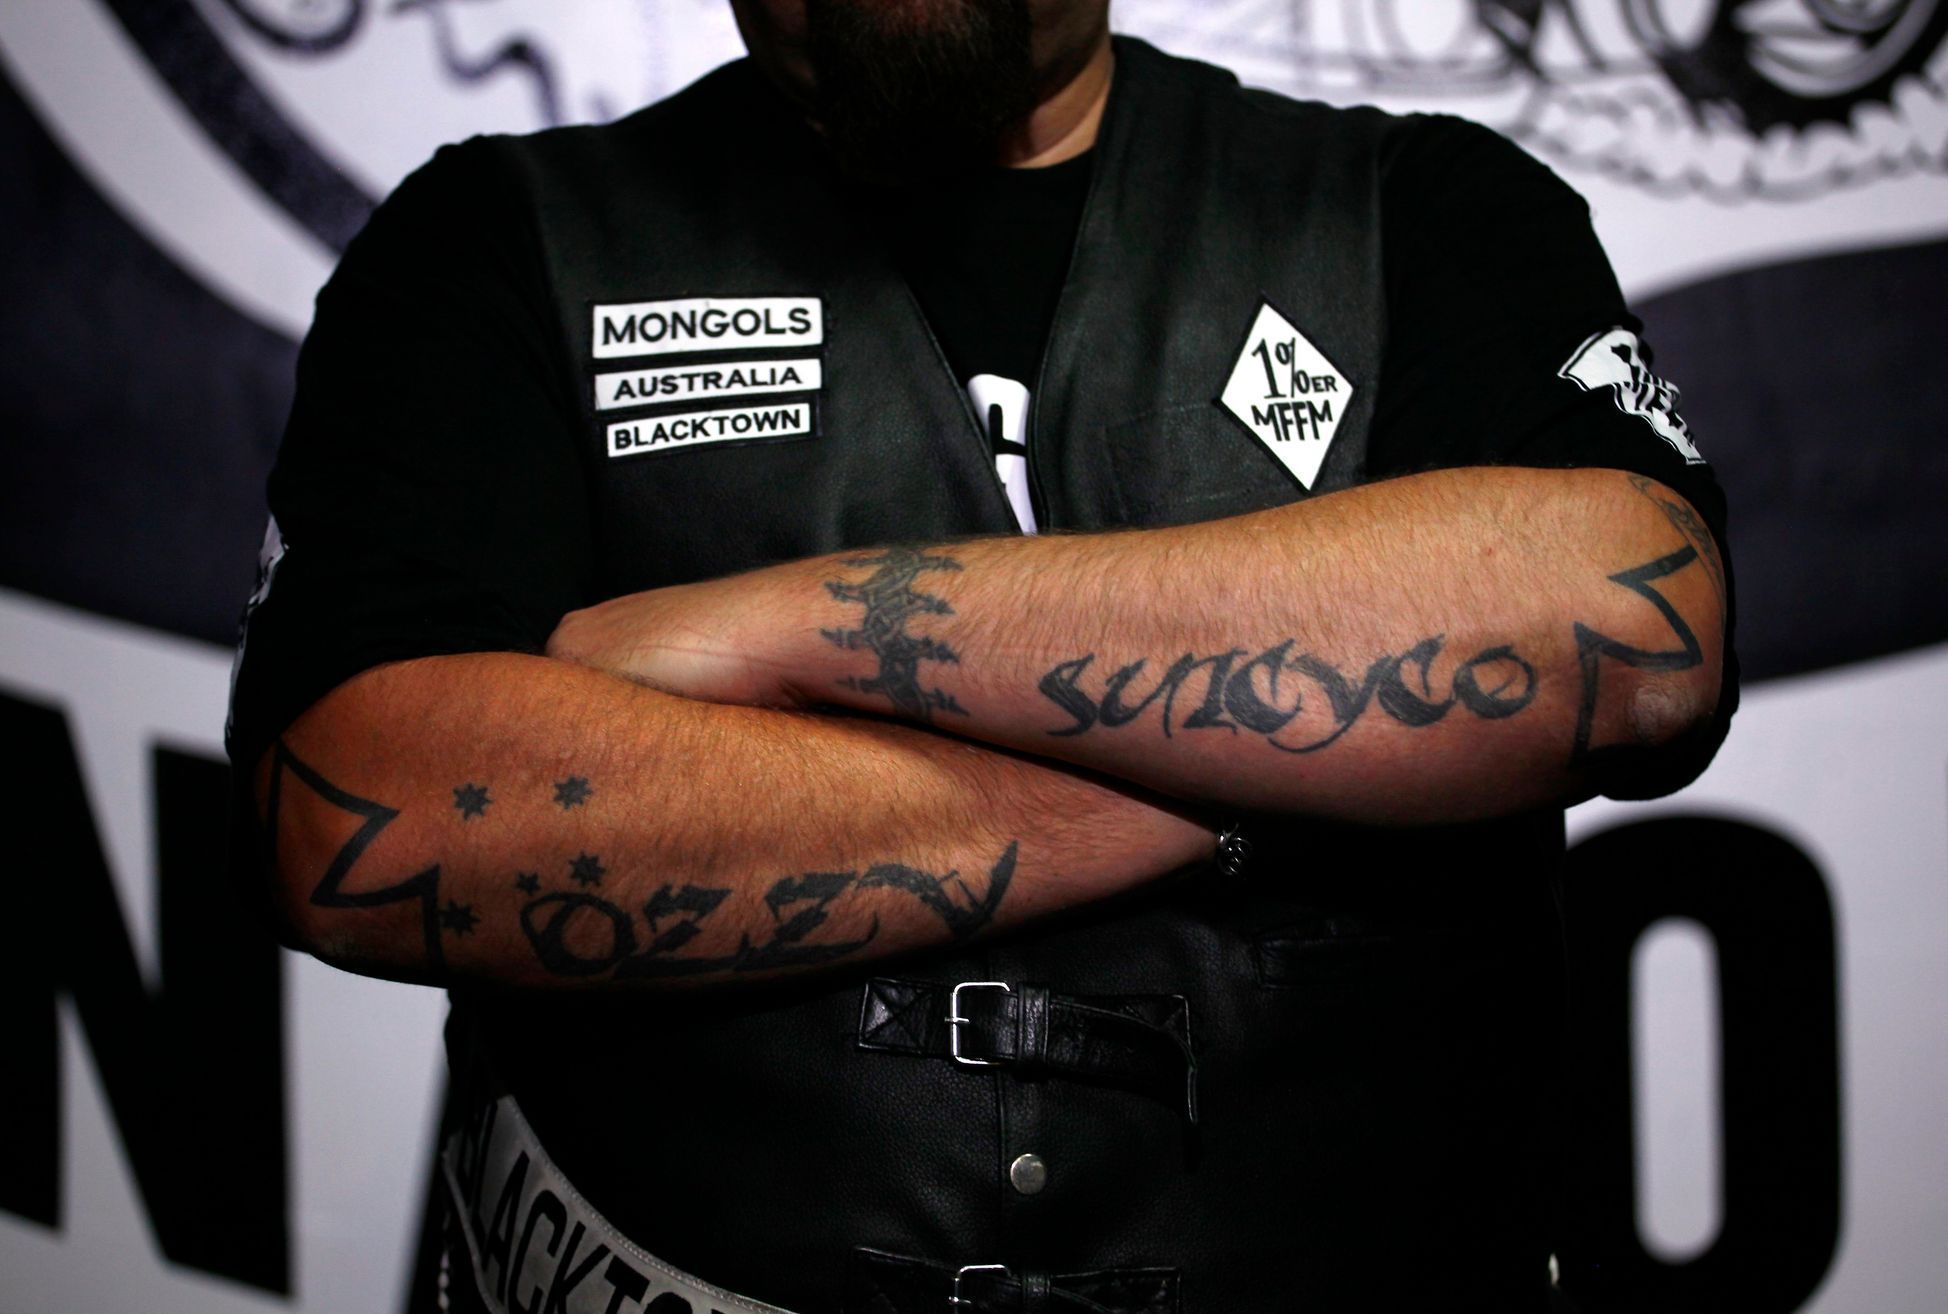 Member of the Mongols Motorcycle Club - 'Ozzie'